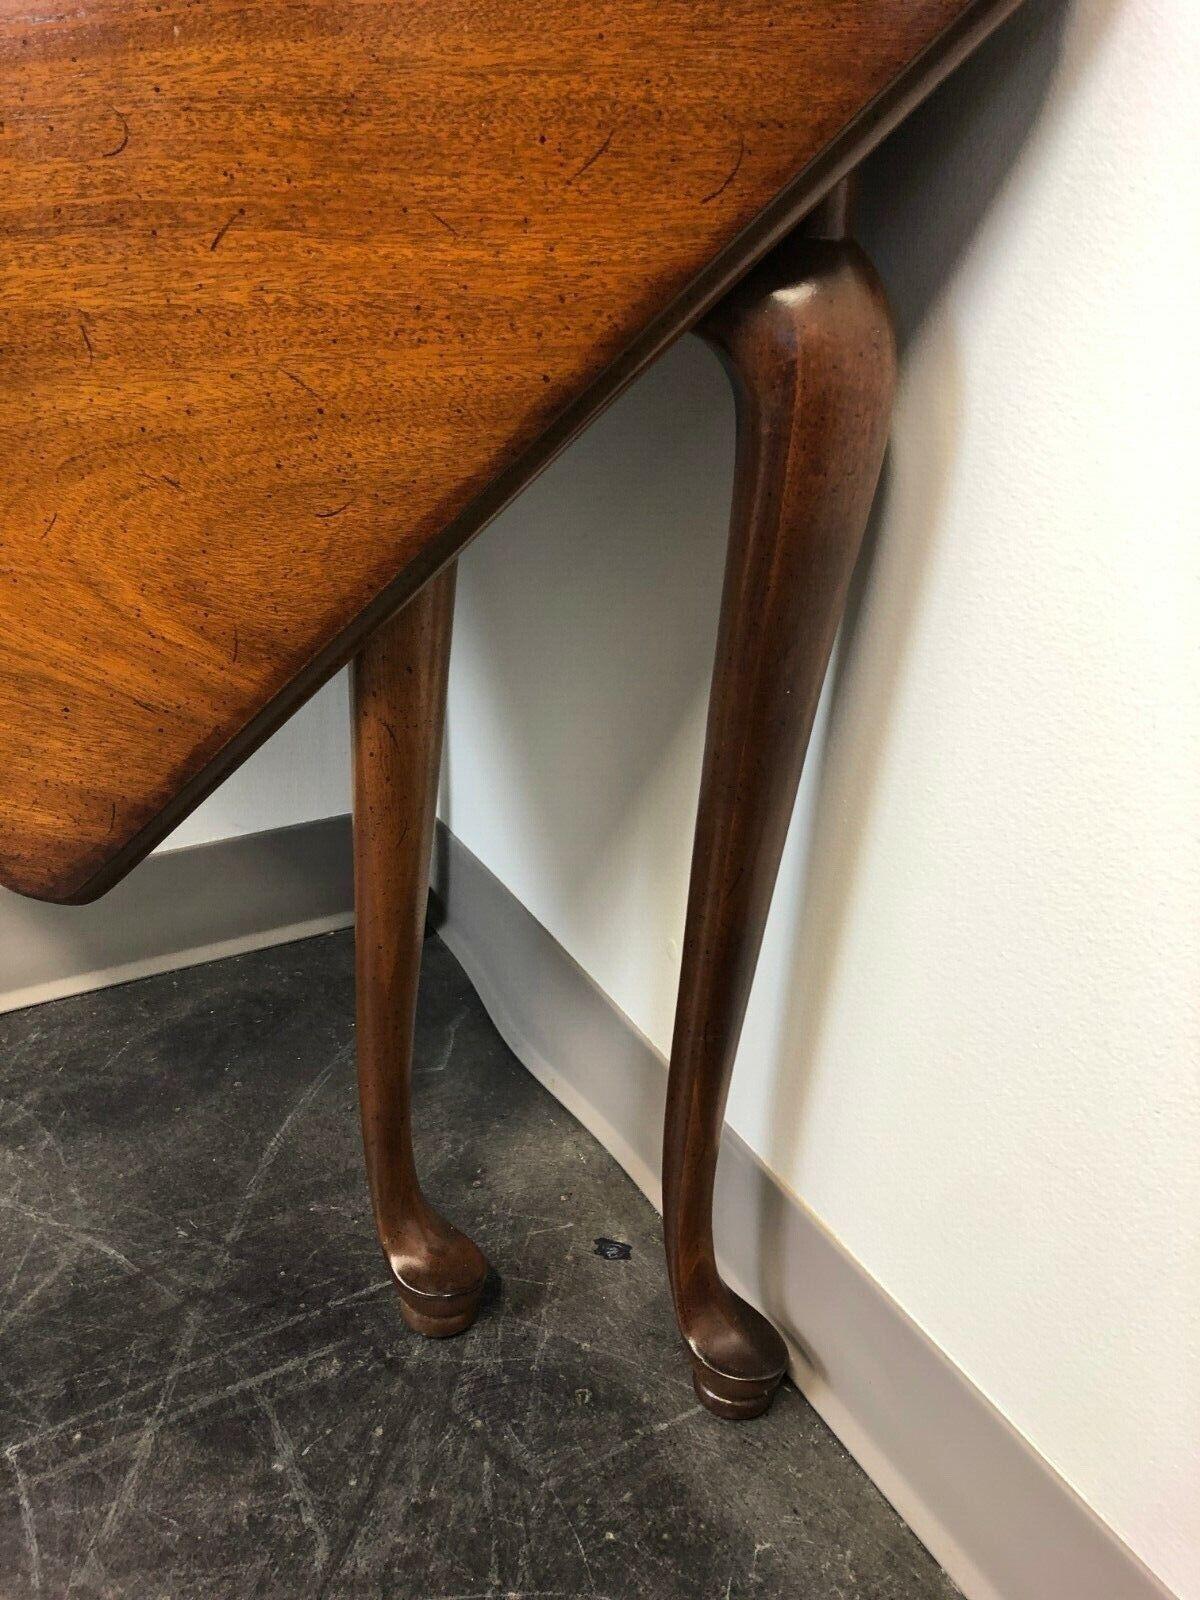 Solid Mahogany Queen Anne Style Drop-Leaf Handkerchief Table 1